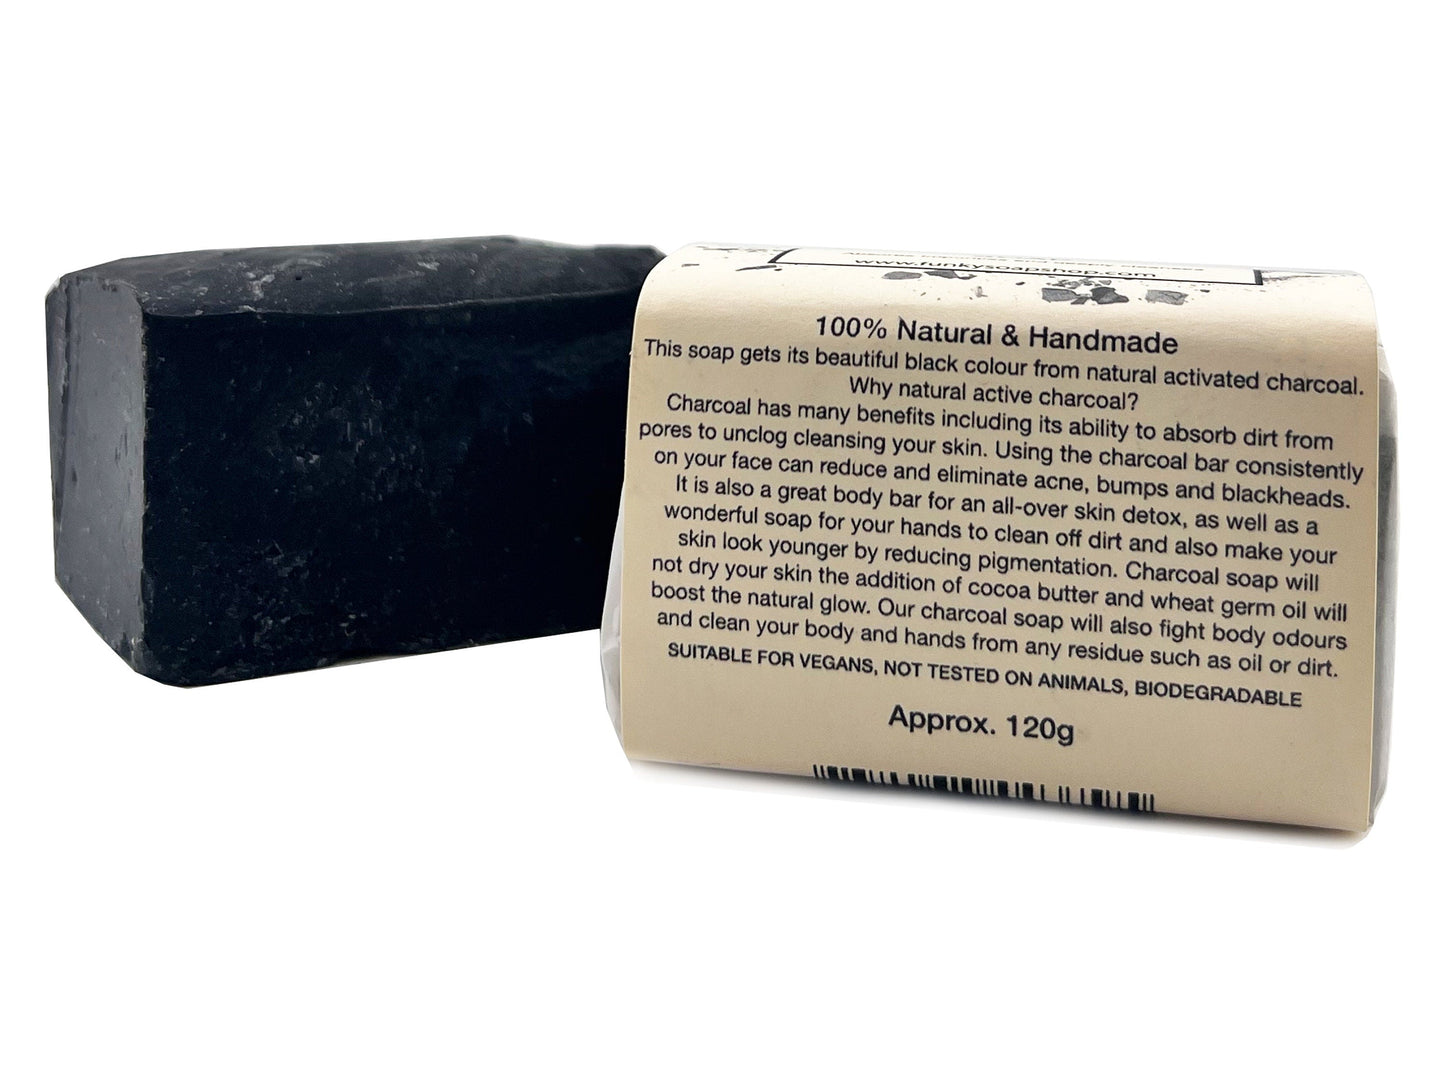 Charcoal Cleansing Soap Bar - Funky Soap Shop